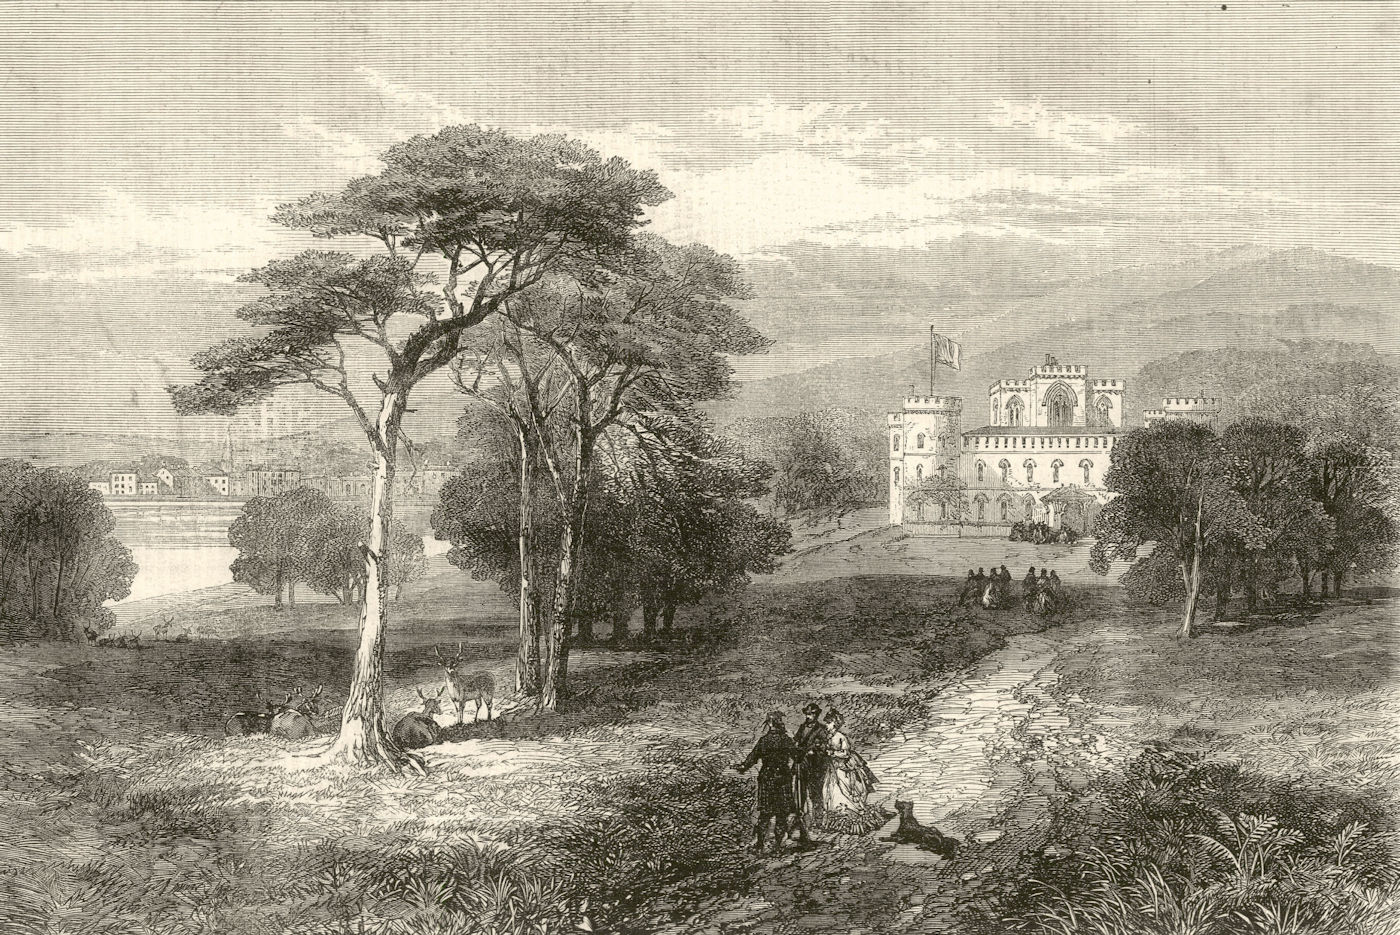 Inverary Castle, the seat of the Duke of Argyll. Scotland 1871 ILN full page